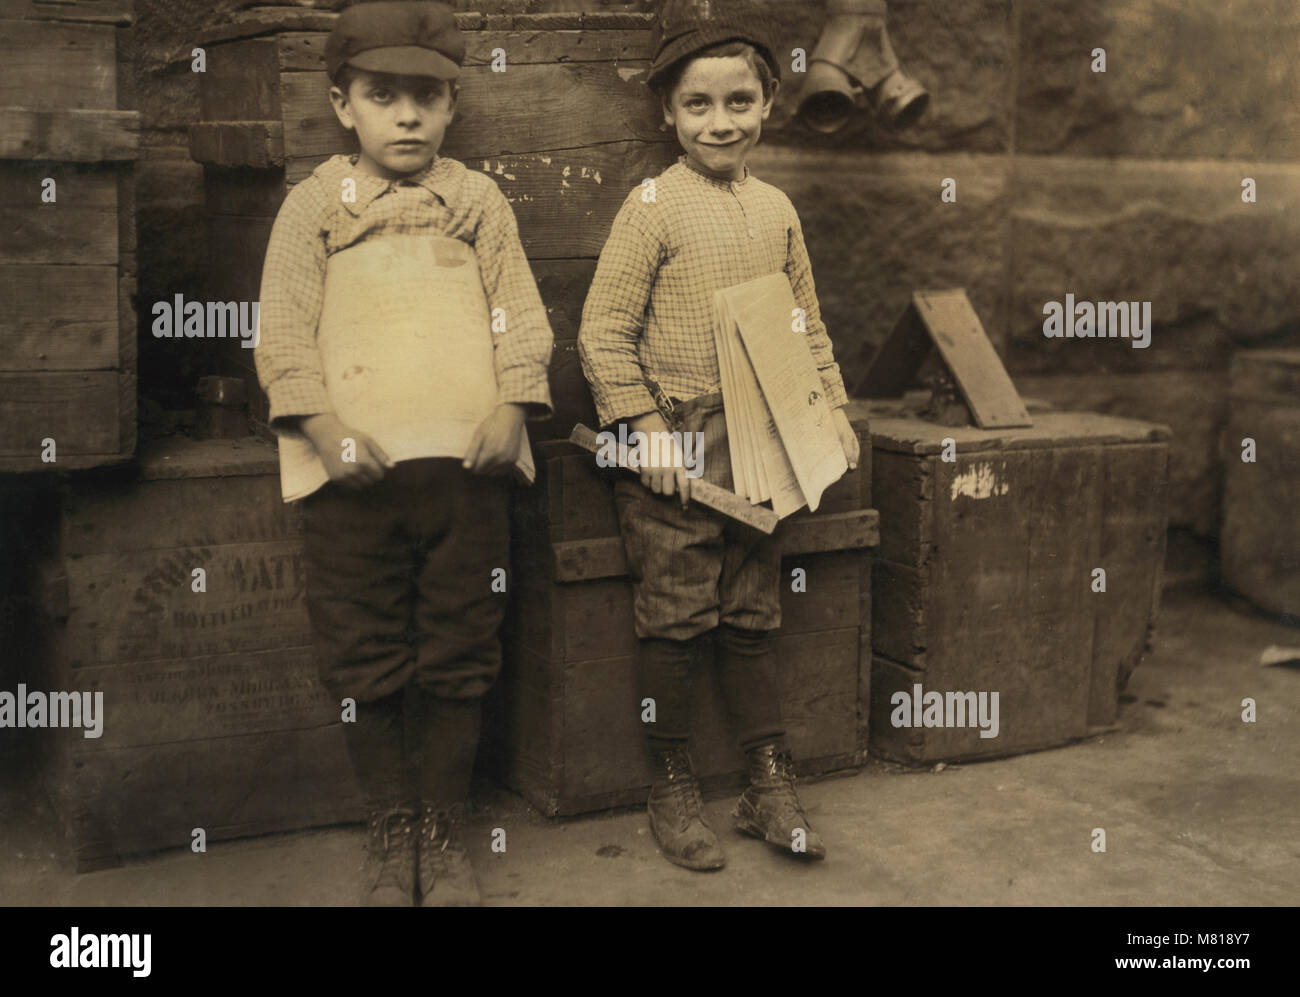 Two Young Newsboys, 7 and 9 years old, Full-Length Portrait Selling Newspapers, New Orleans, Louisiana, USA, Lewis Hine for National Child Labor Committee, November 1913 Stock Photo